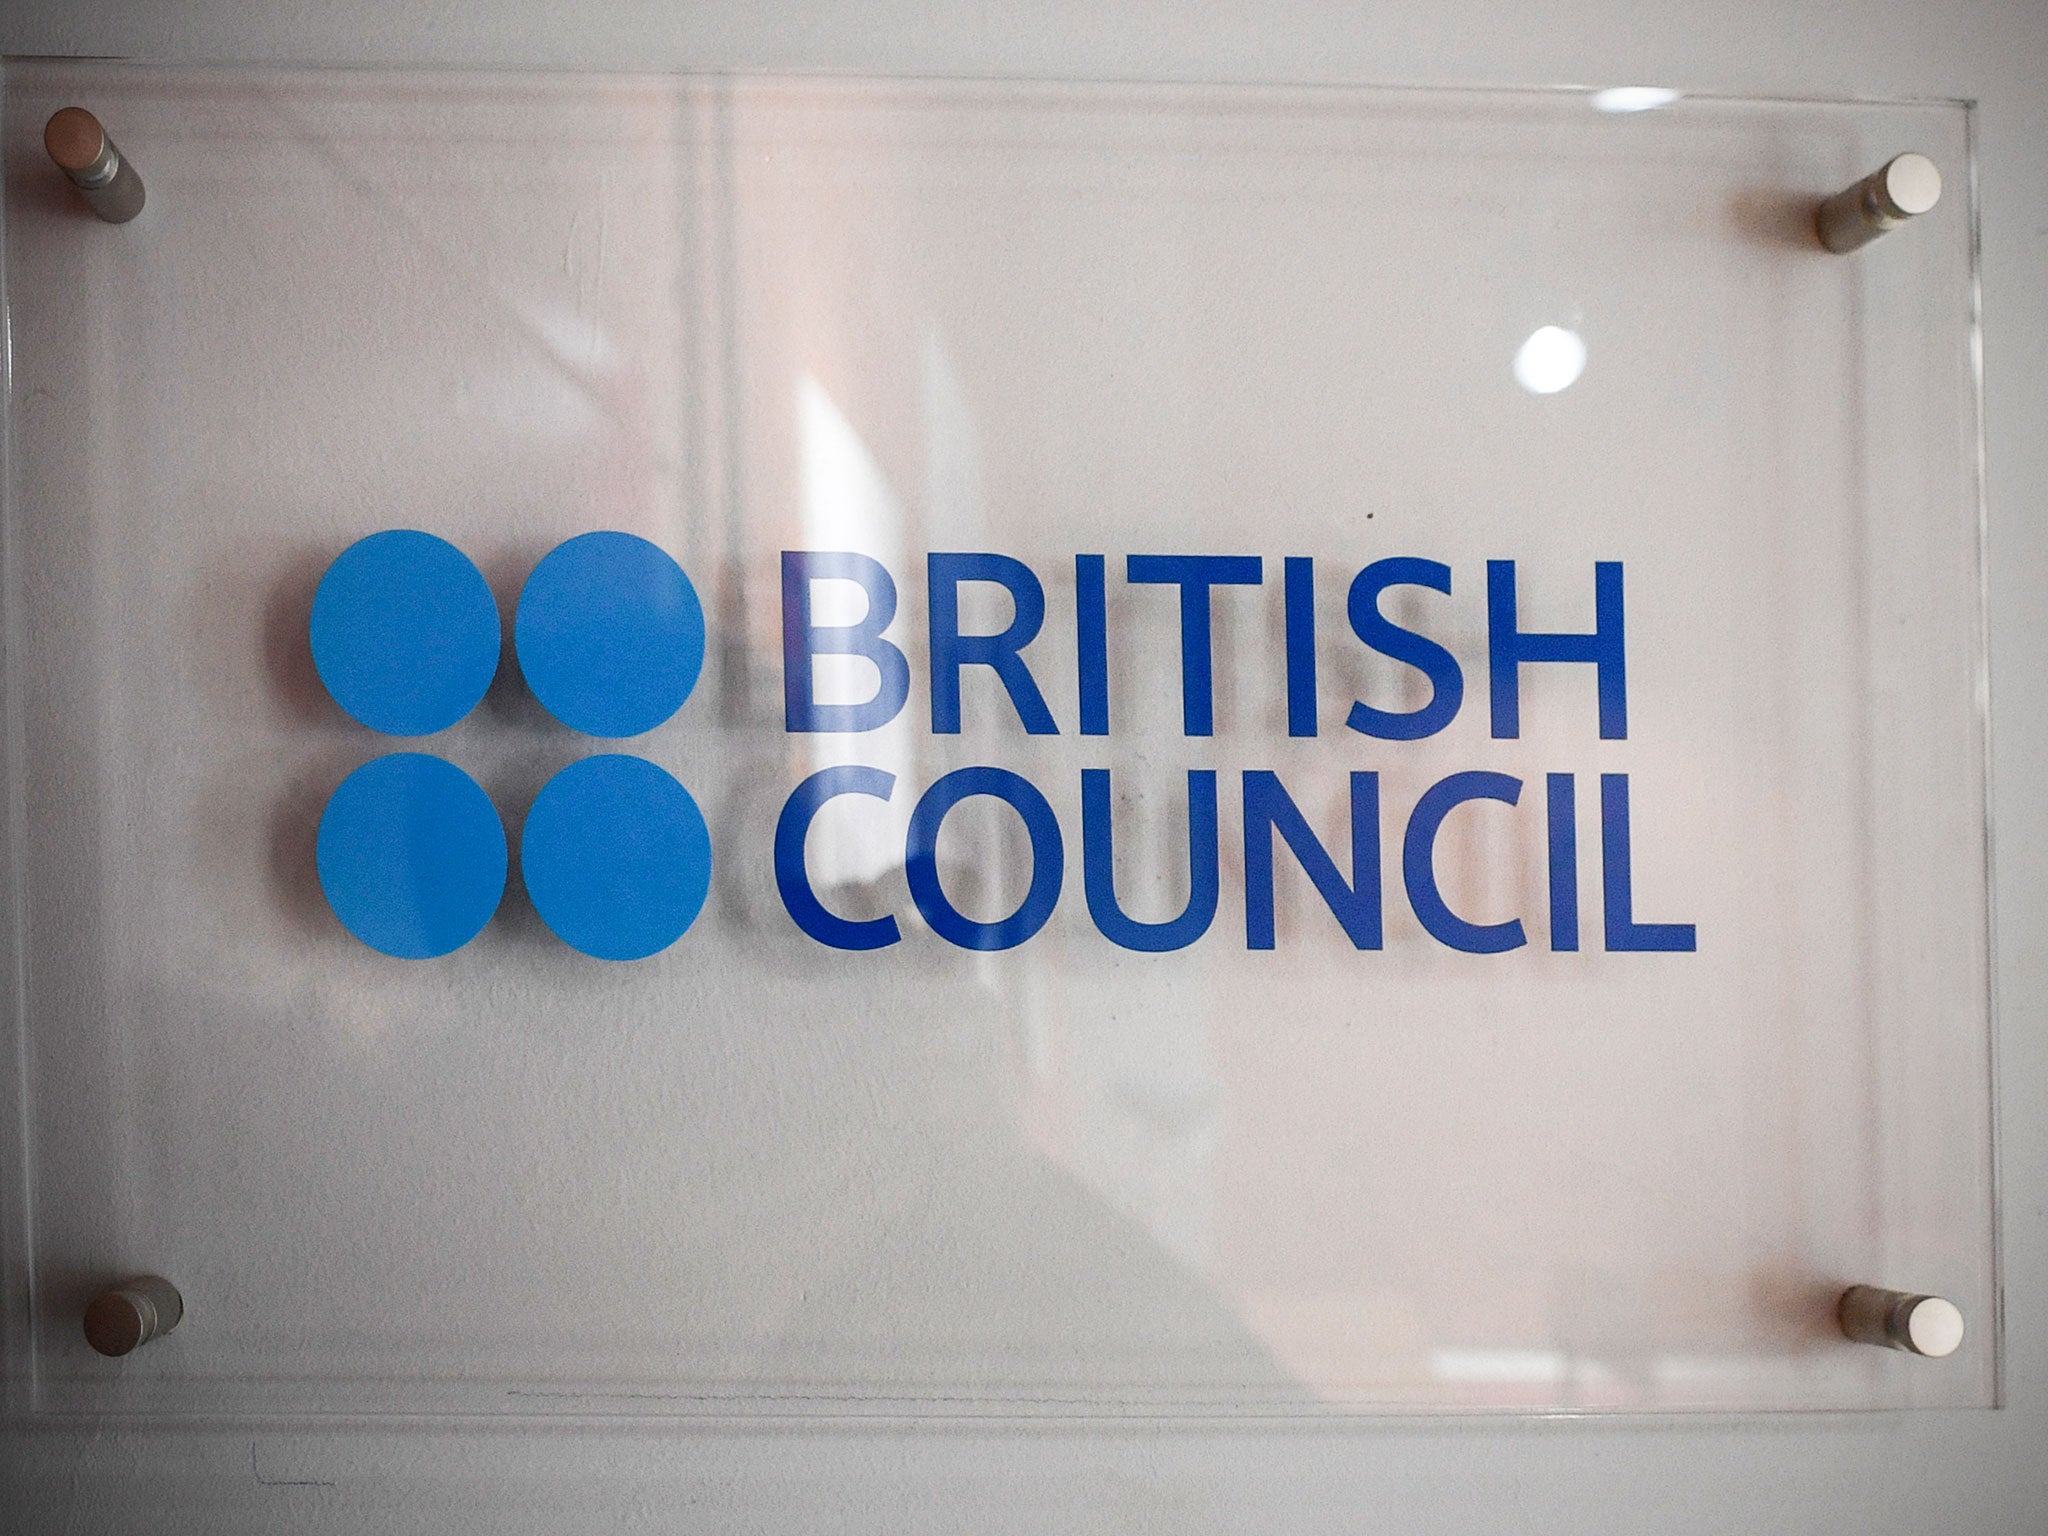 The person jailed in Iran for allegedly spying for Britain worked on the Iran desk at the British Council